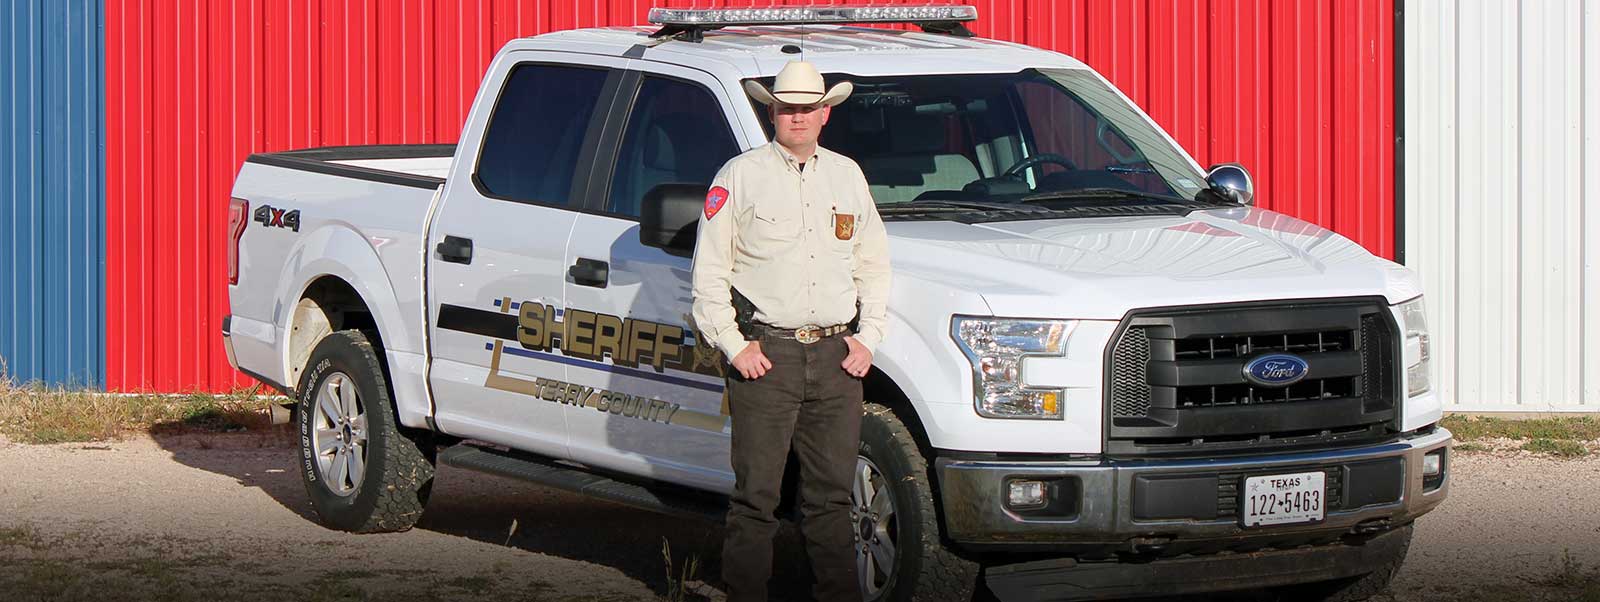 Terry County Sheriff Timothy Click